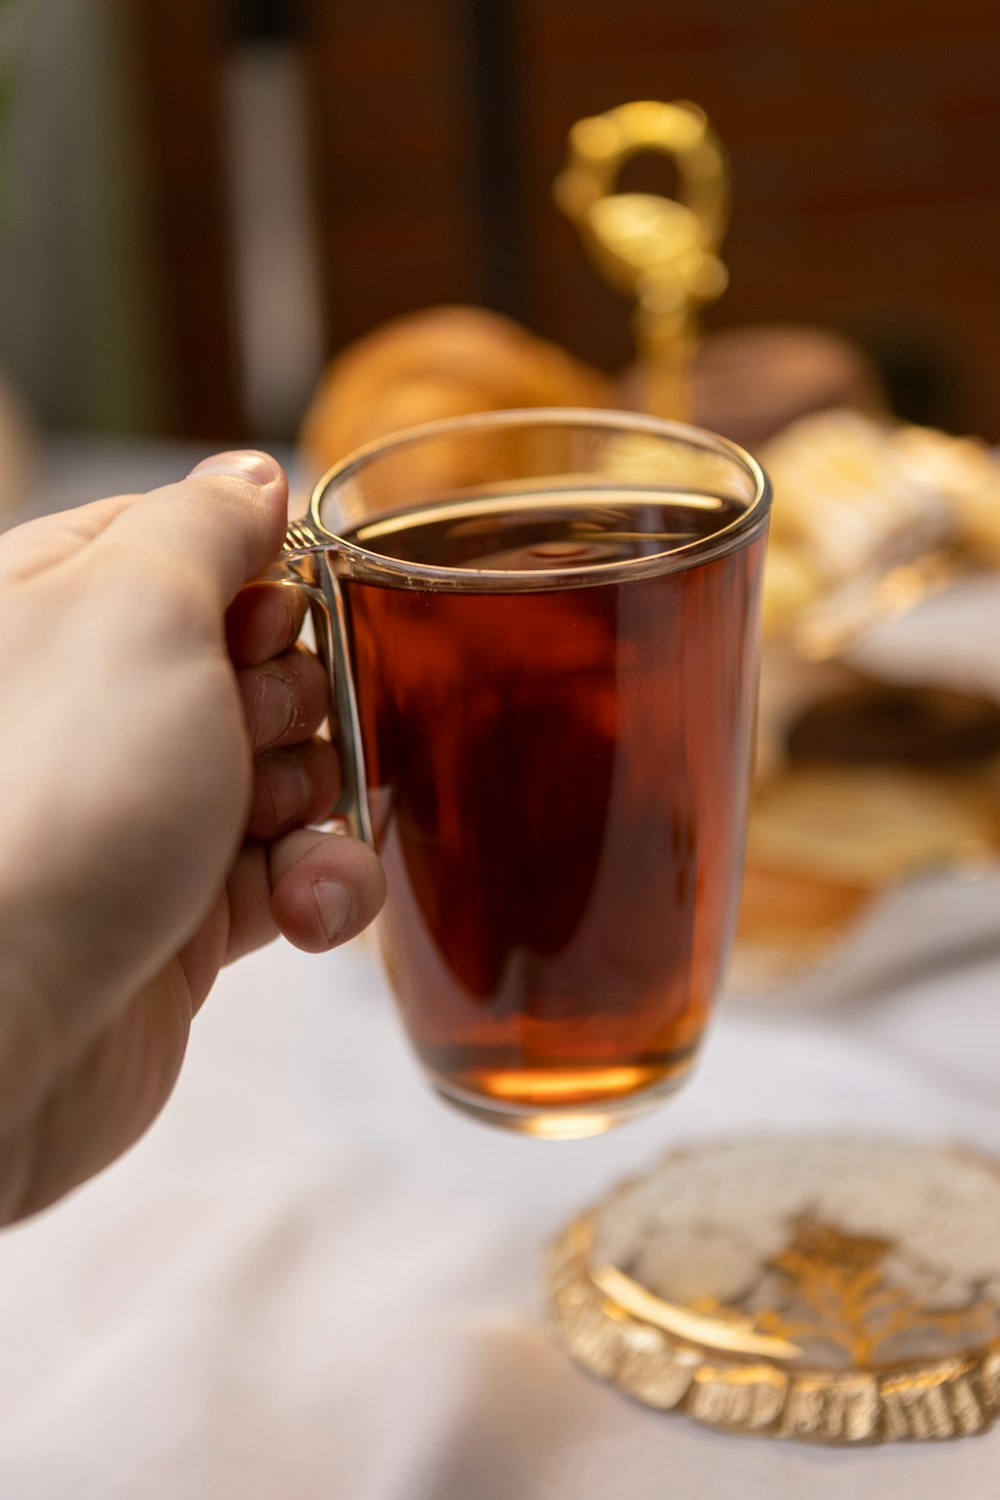 a person holding a cup of tea on a table